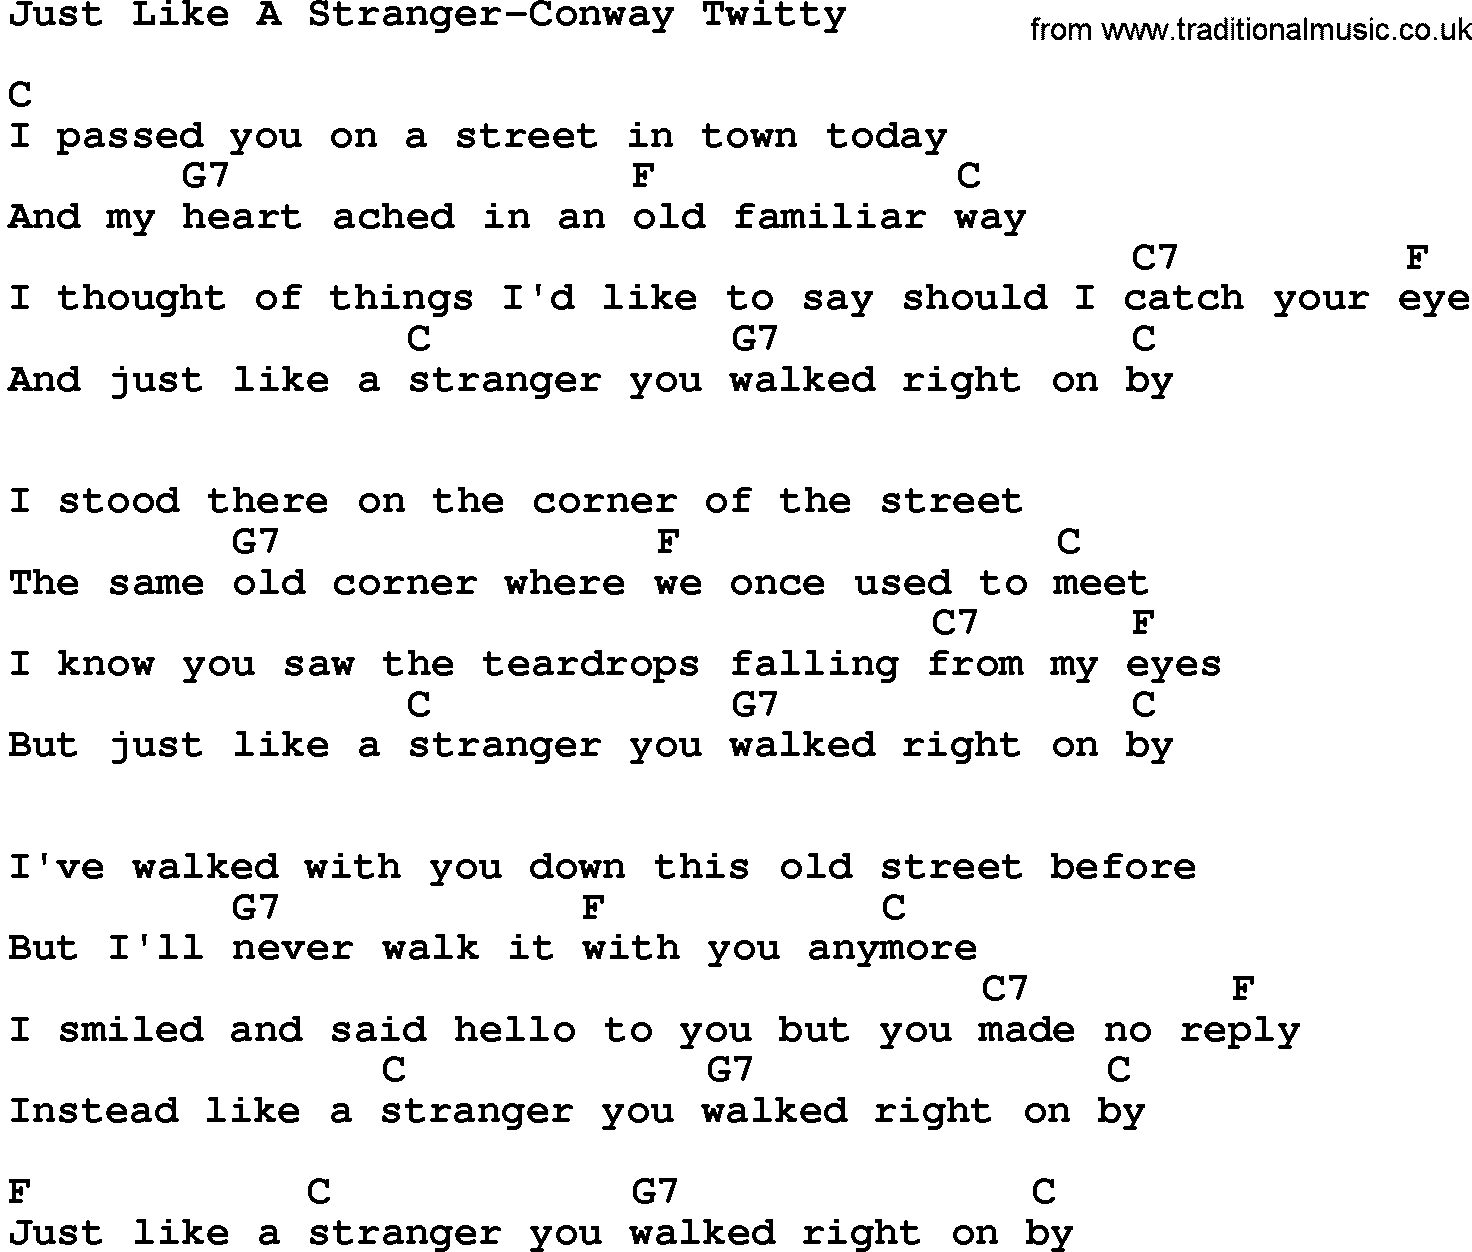 Country music song: Just Like A Stranger-Conway Twitty lyrics and chords